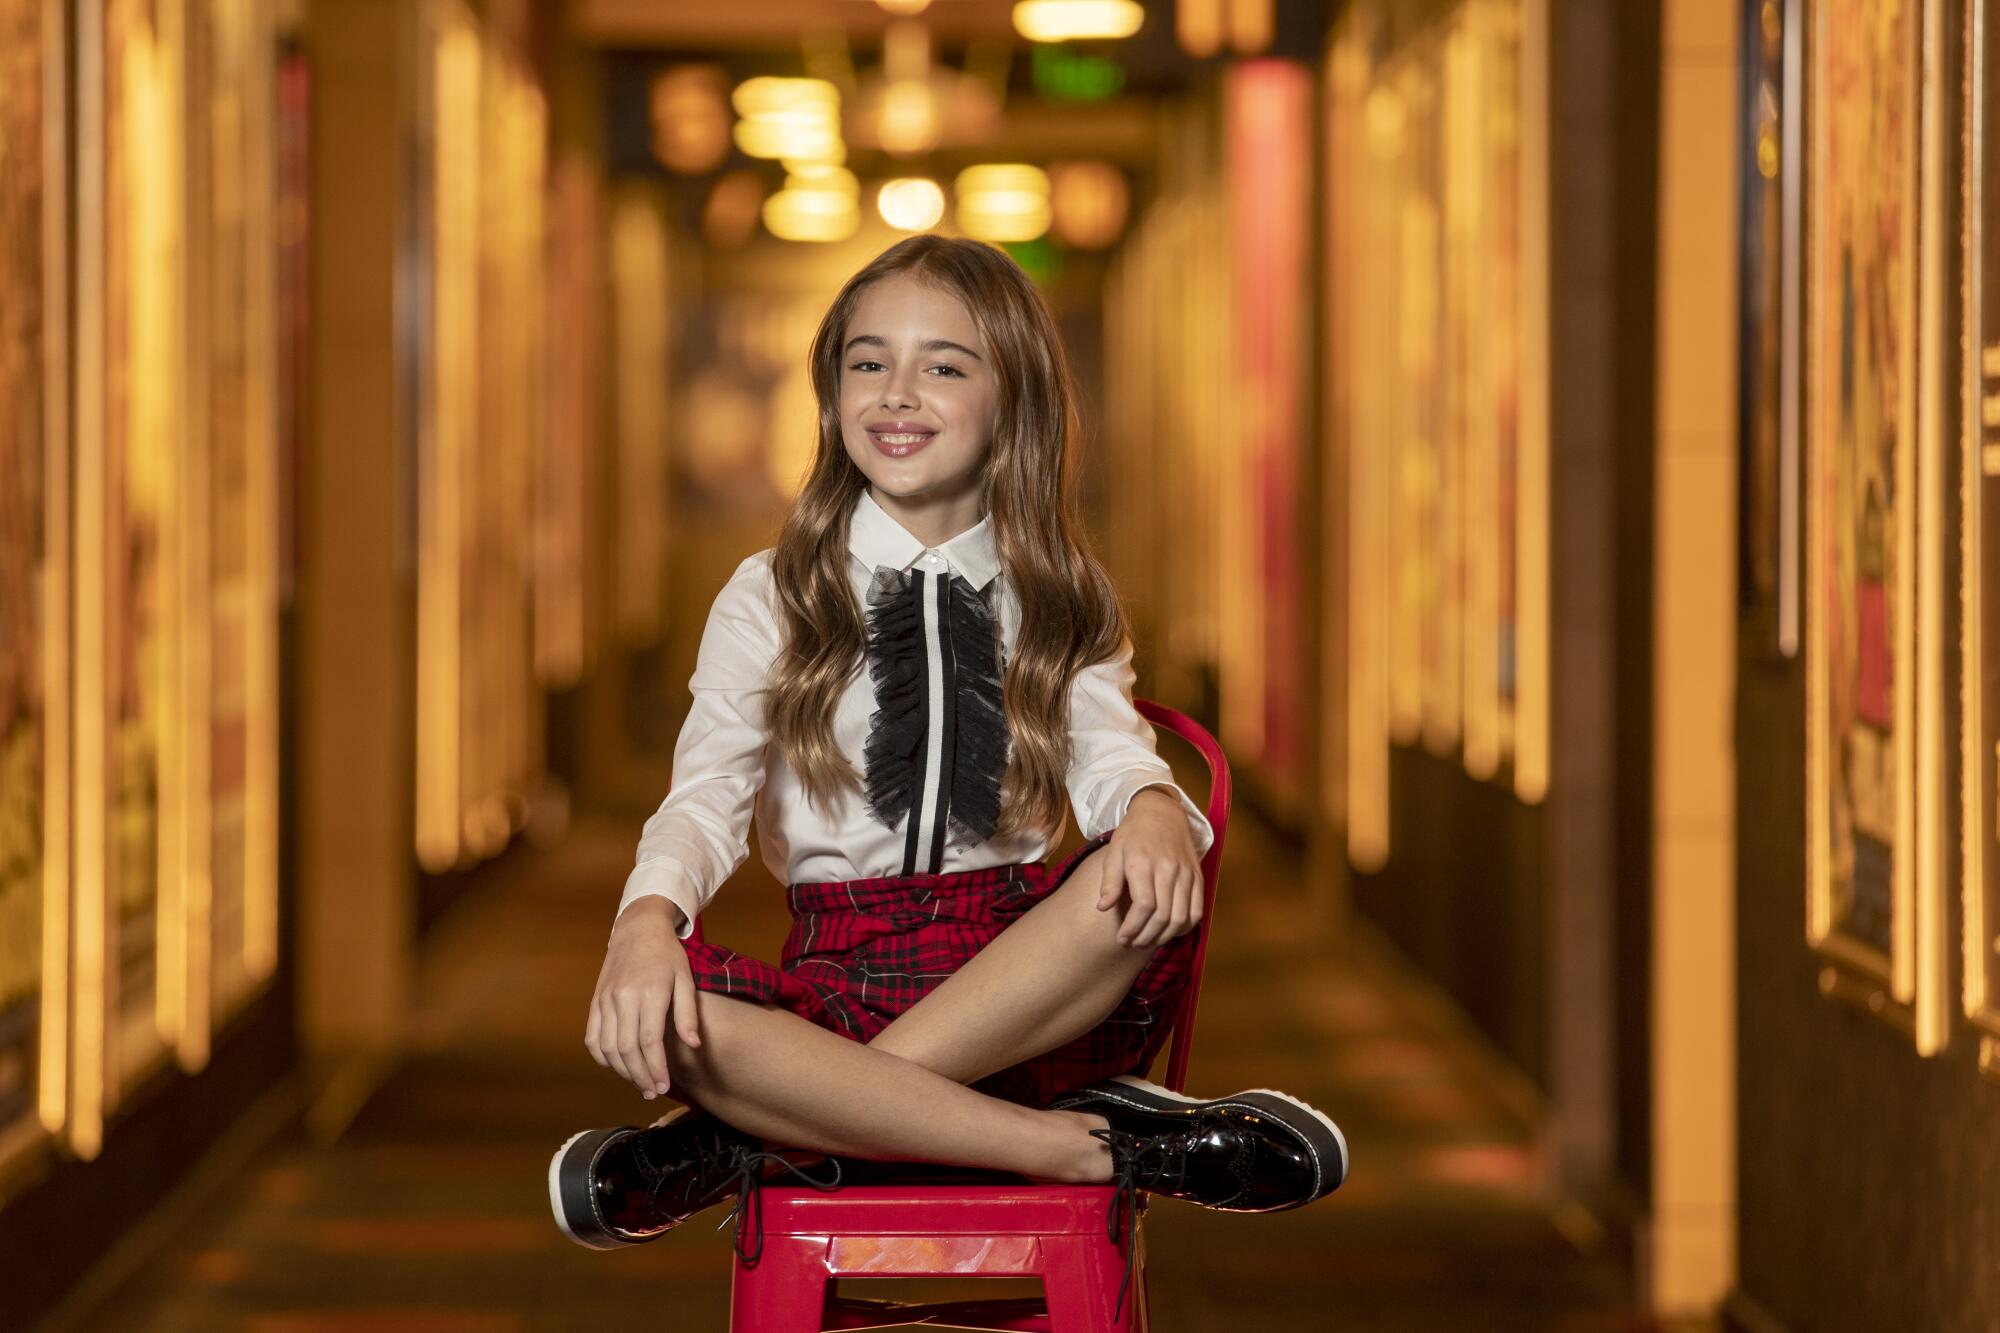 Julia Butters, 10, sitting cross-legged on a red chair.